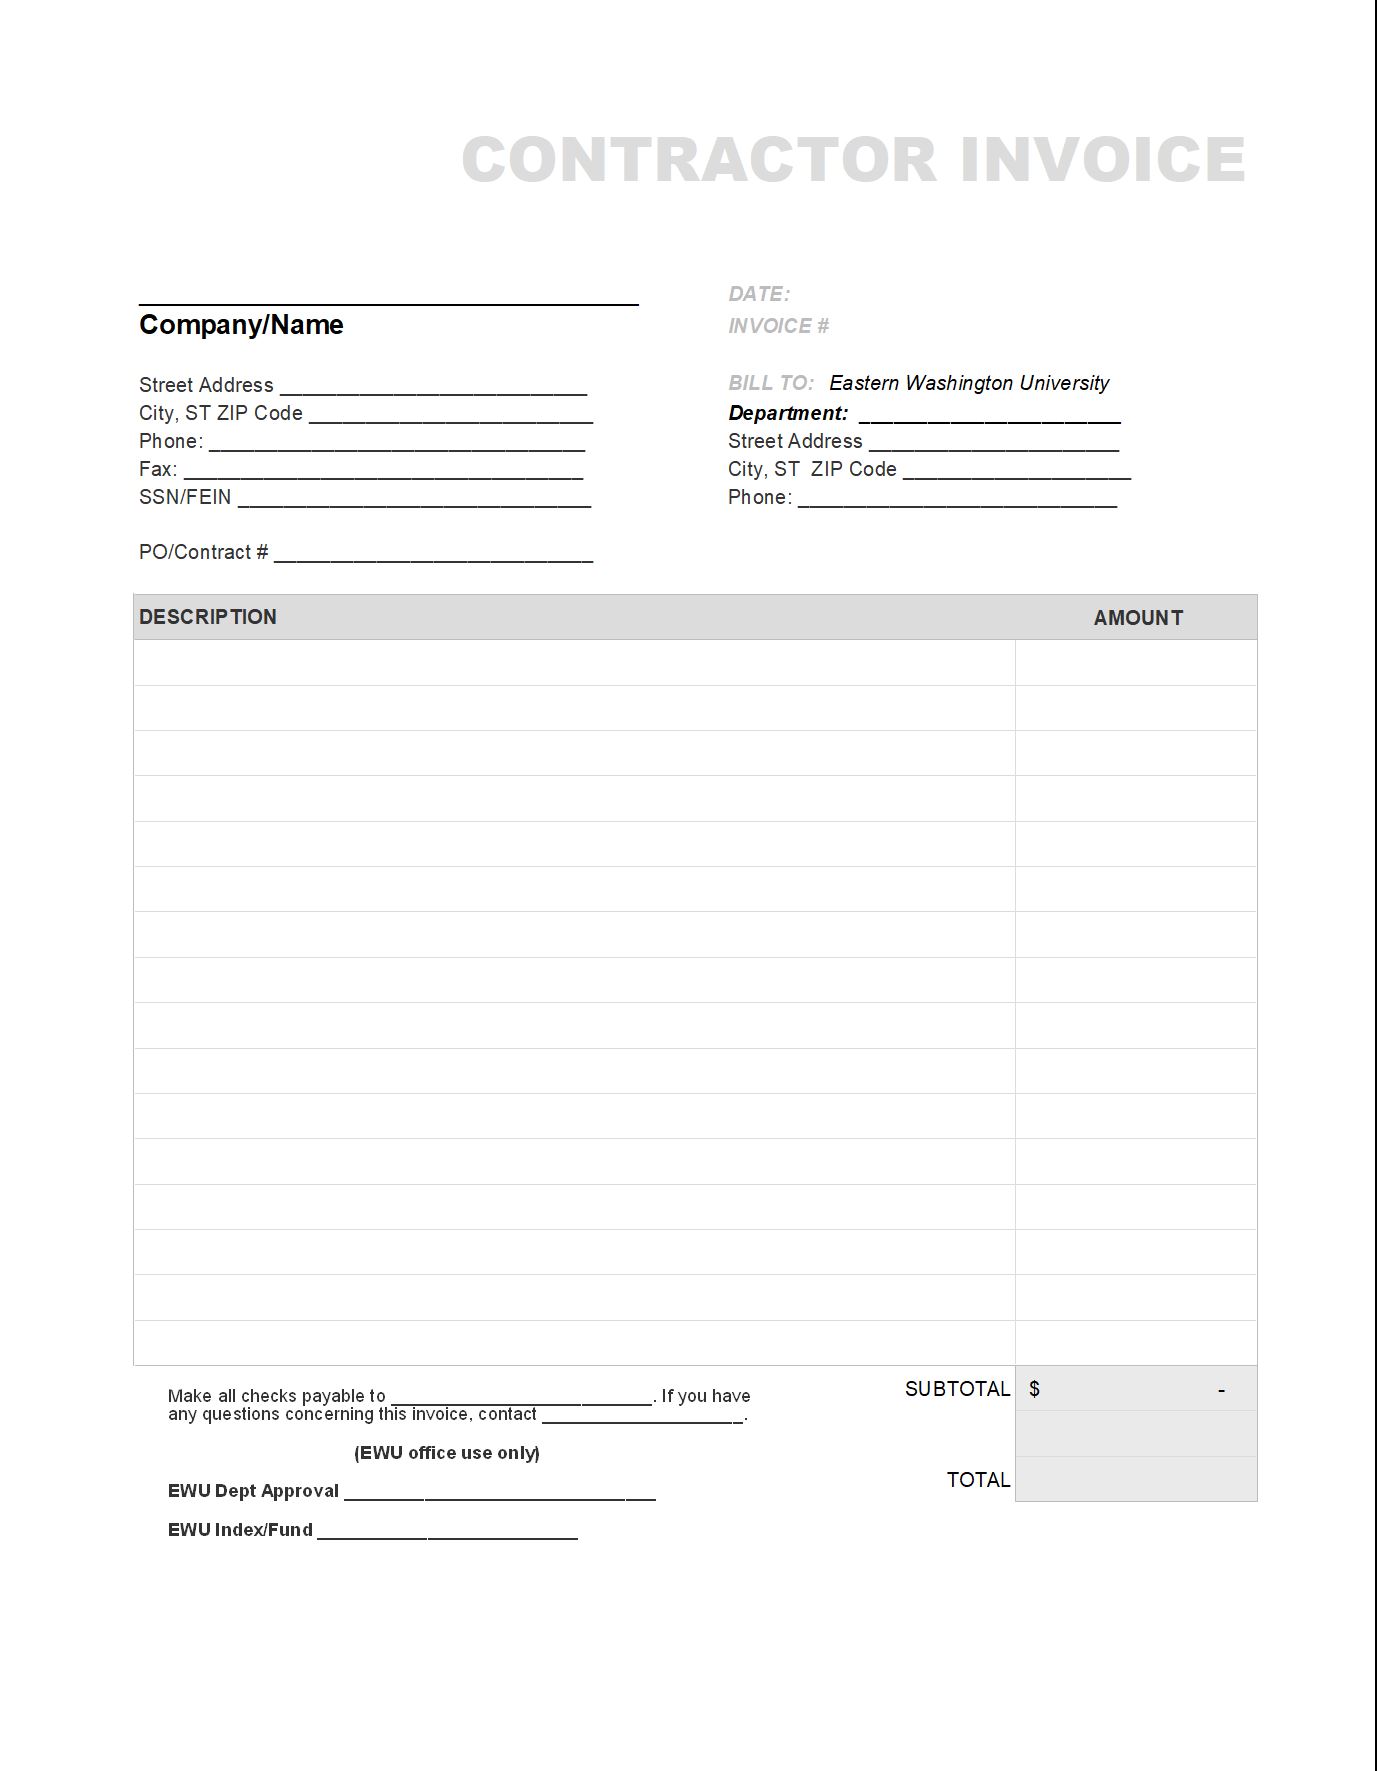 21 Independent Contractor Invoice Templates (FREE) Inside Invoice Template For Builders